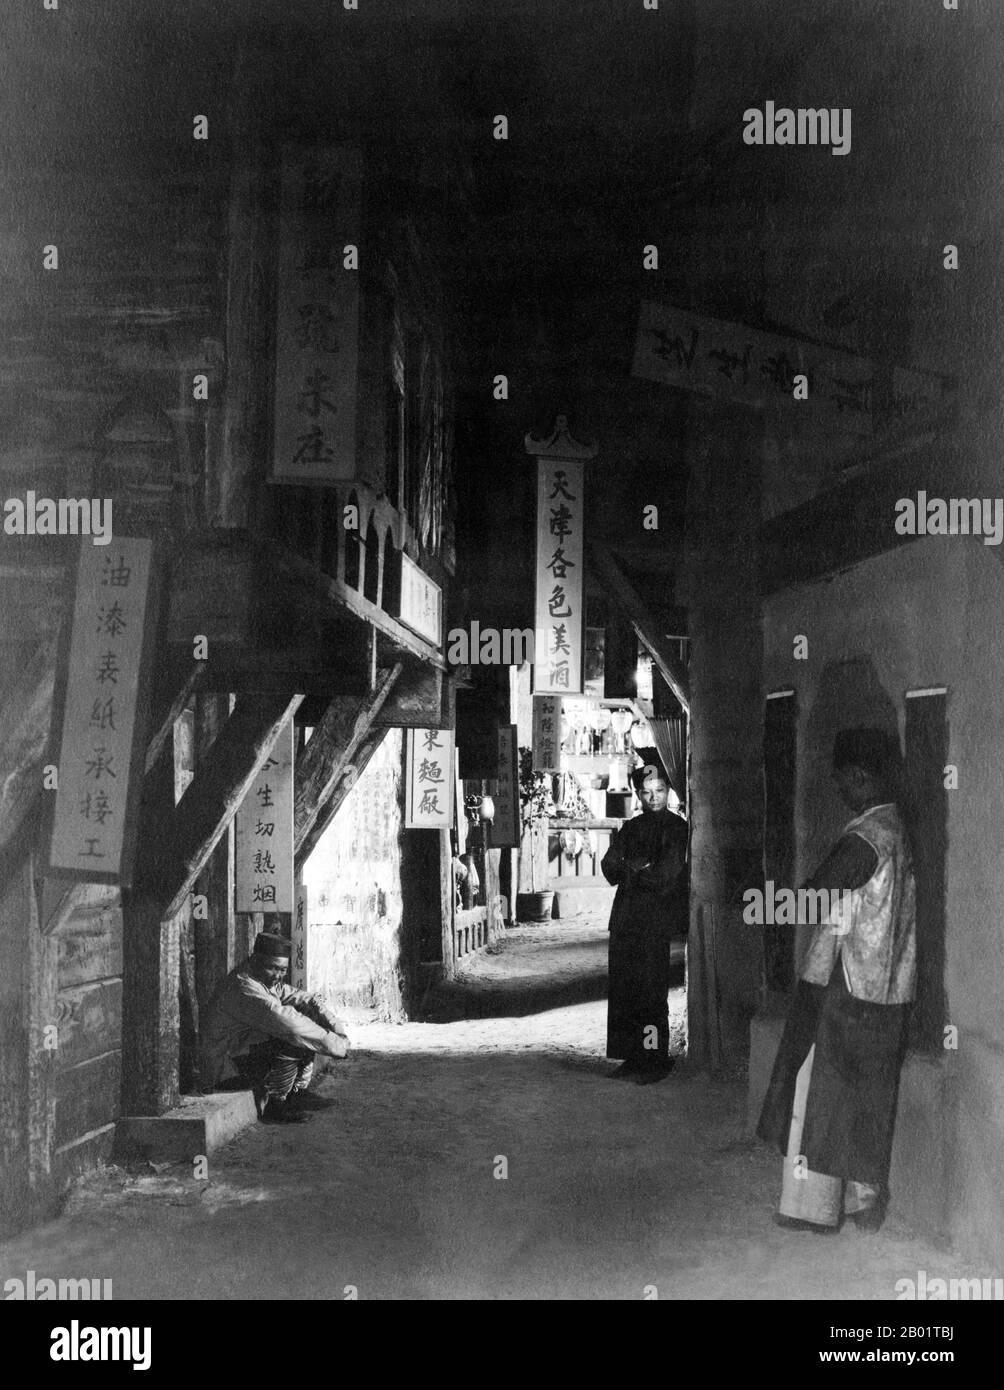 USA: 'Neighbours of the Alley'. Shopkeepers in a back alley, Los Angeles Old Chinatown, c. 1922.  Chinatown in Los Angeles, California is located in the city's downtown area. Built in 1938, it is the second Chinatown to be constructed in Los Angeles. The original historic Chinatown was founded in the late 19th century, but was demolished to make room for Union Station, the city's major rail depot, leaving its residents and businesses displaced. It is one of three current major Chinatowns in California; one in San Francisco and the other being in Oakland. Stock Photo